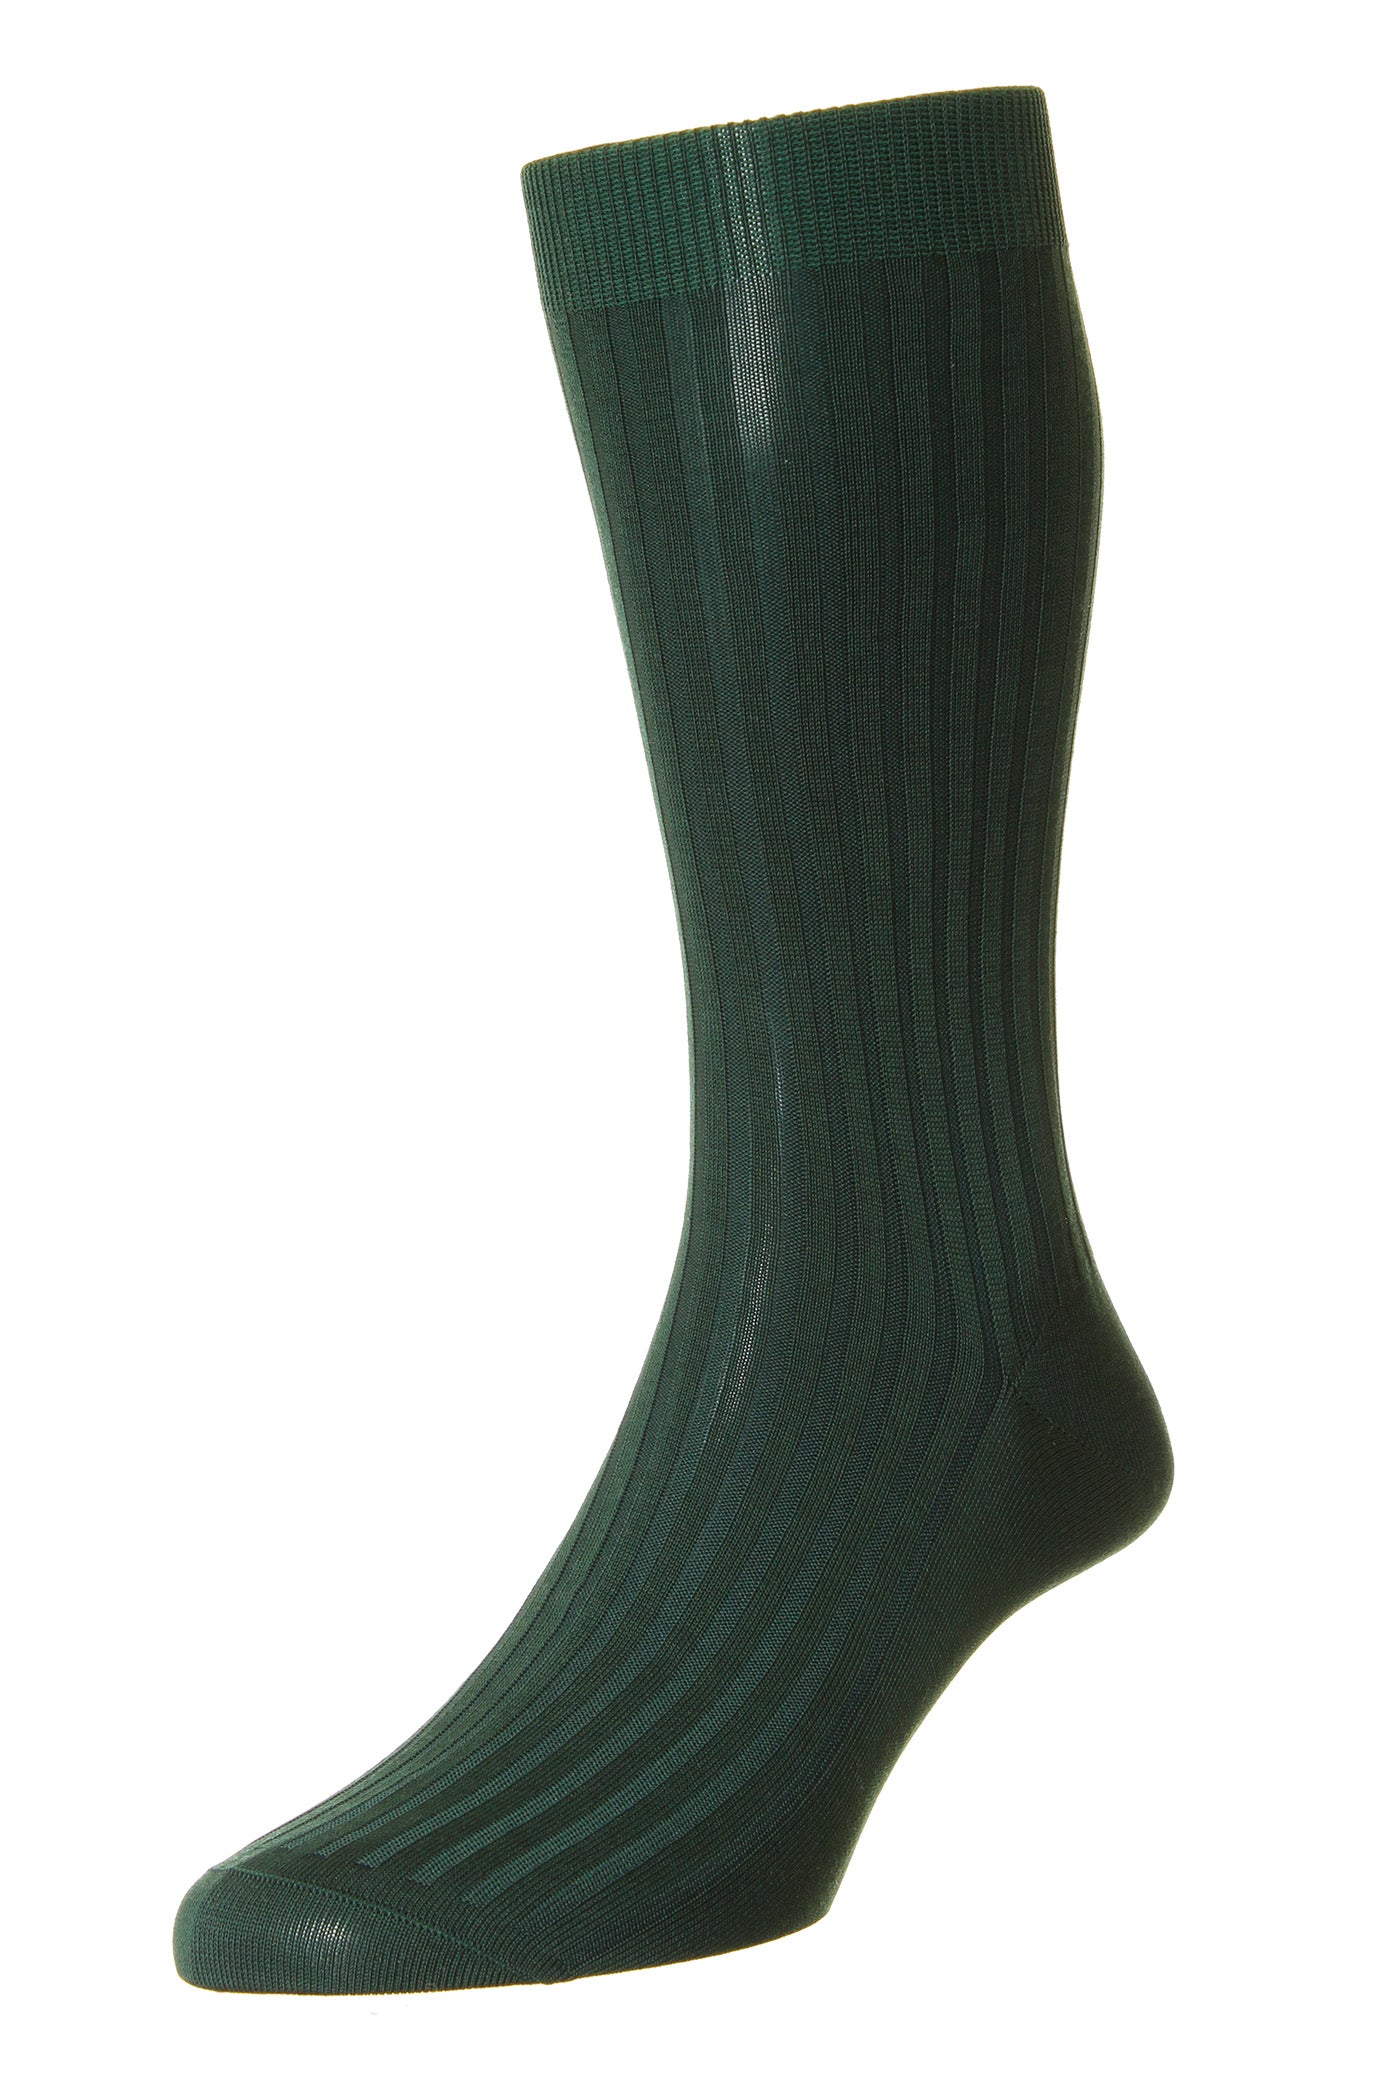 Classic Collection "Danver" Sock